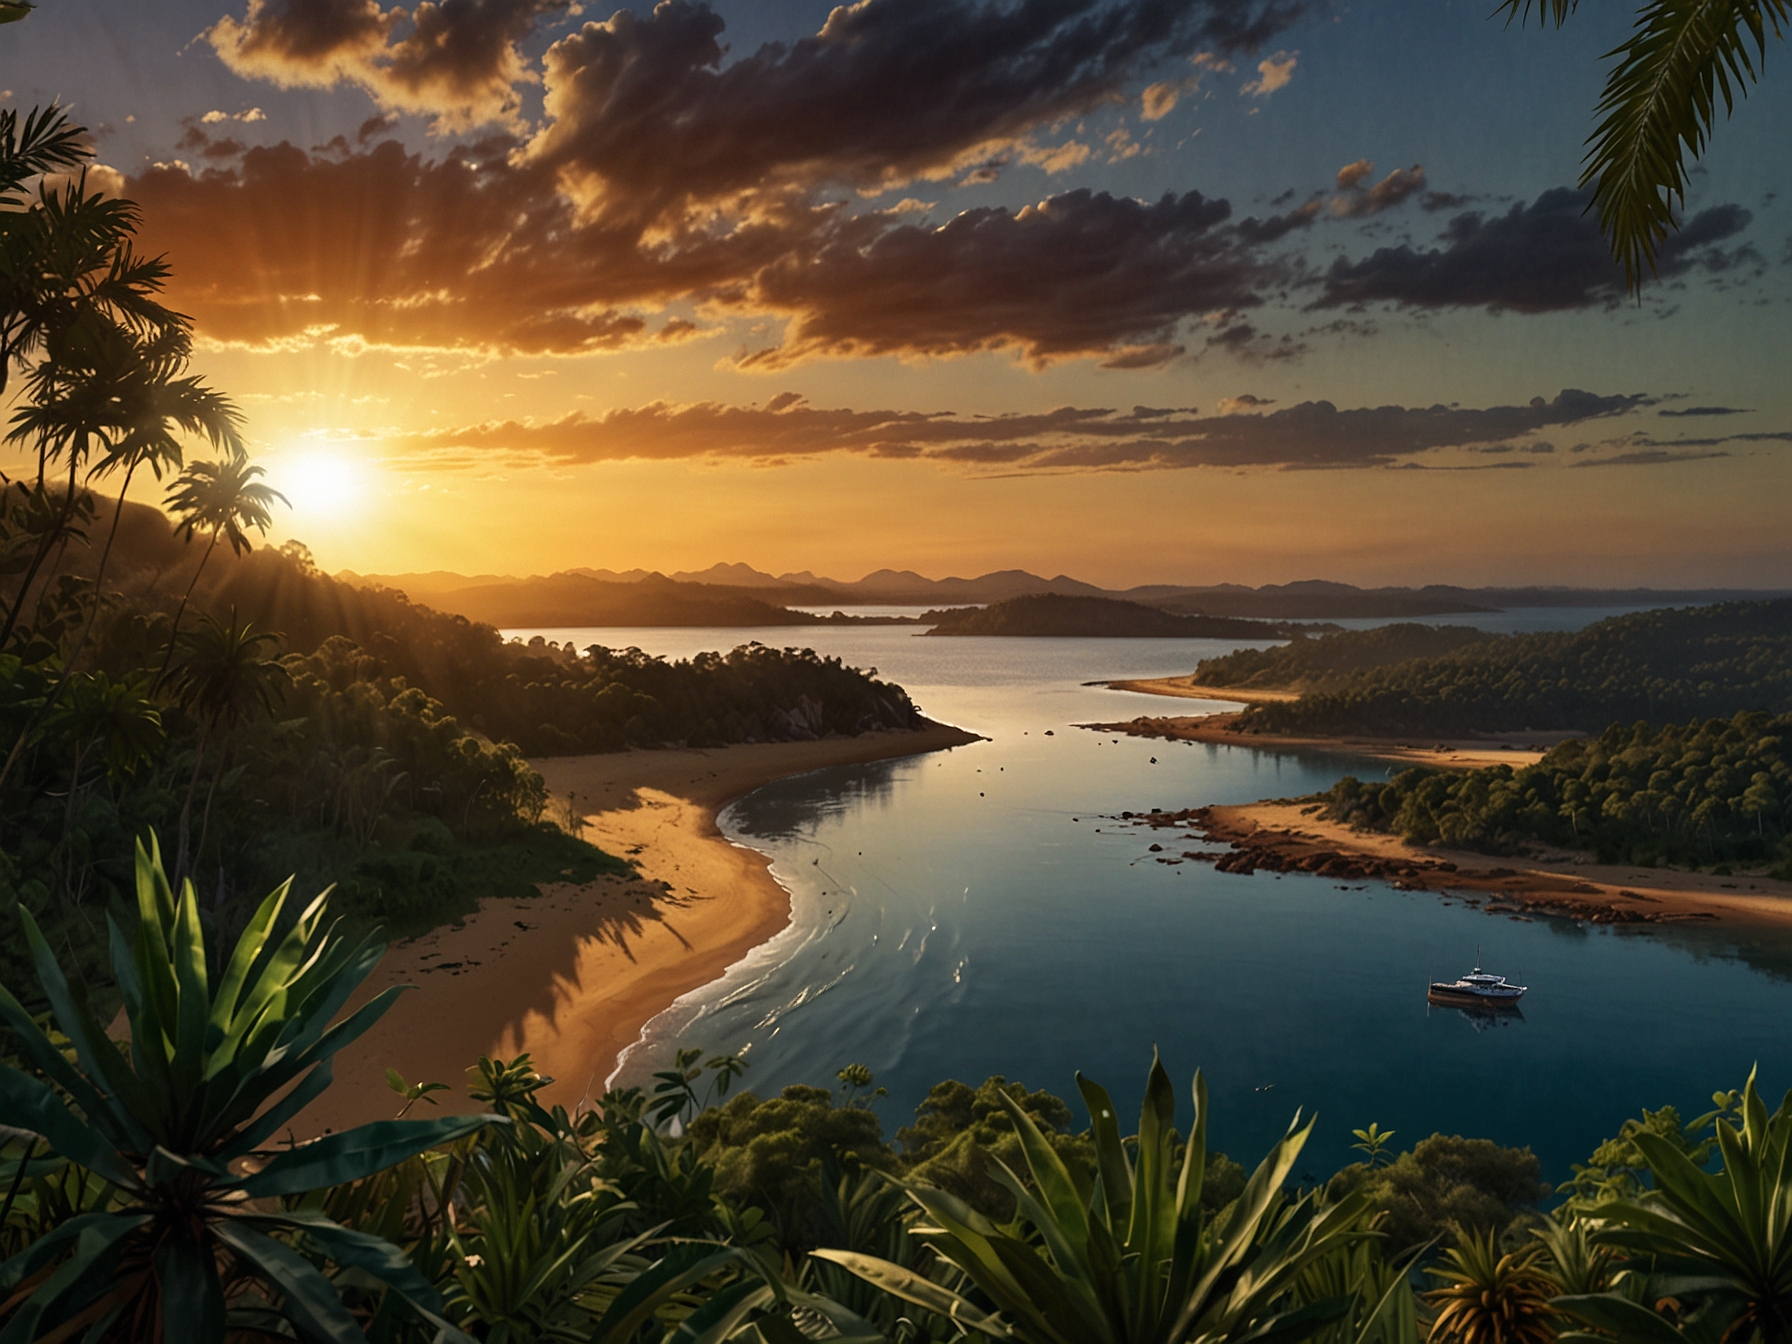 A scenic view of the Sunshine Coast region, showcasing its natural beauty. This image highlights the lands over which the Kabi Kabi people have been granted native title rights.